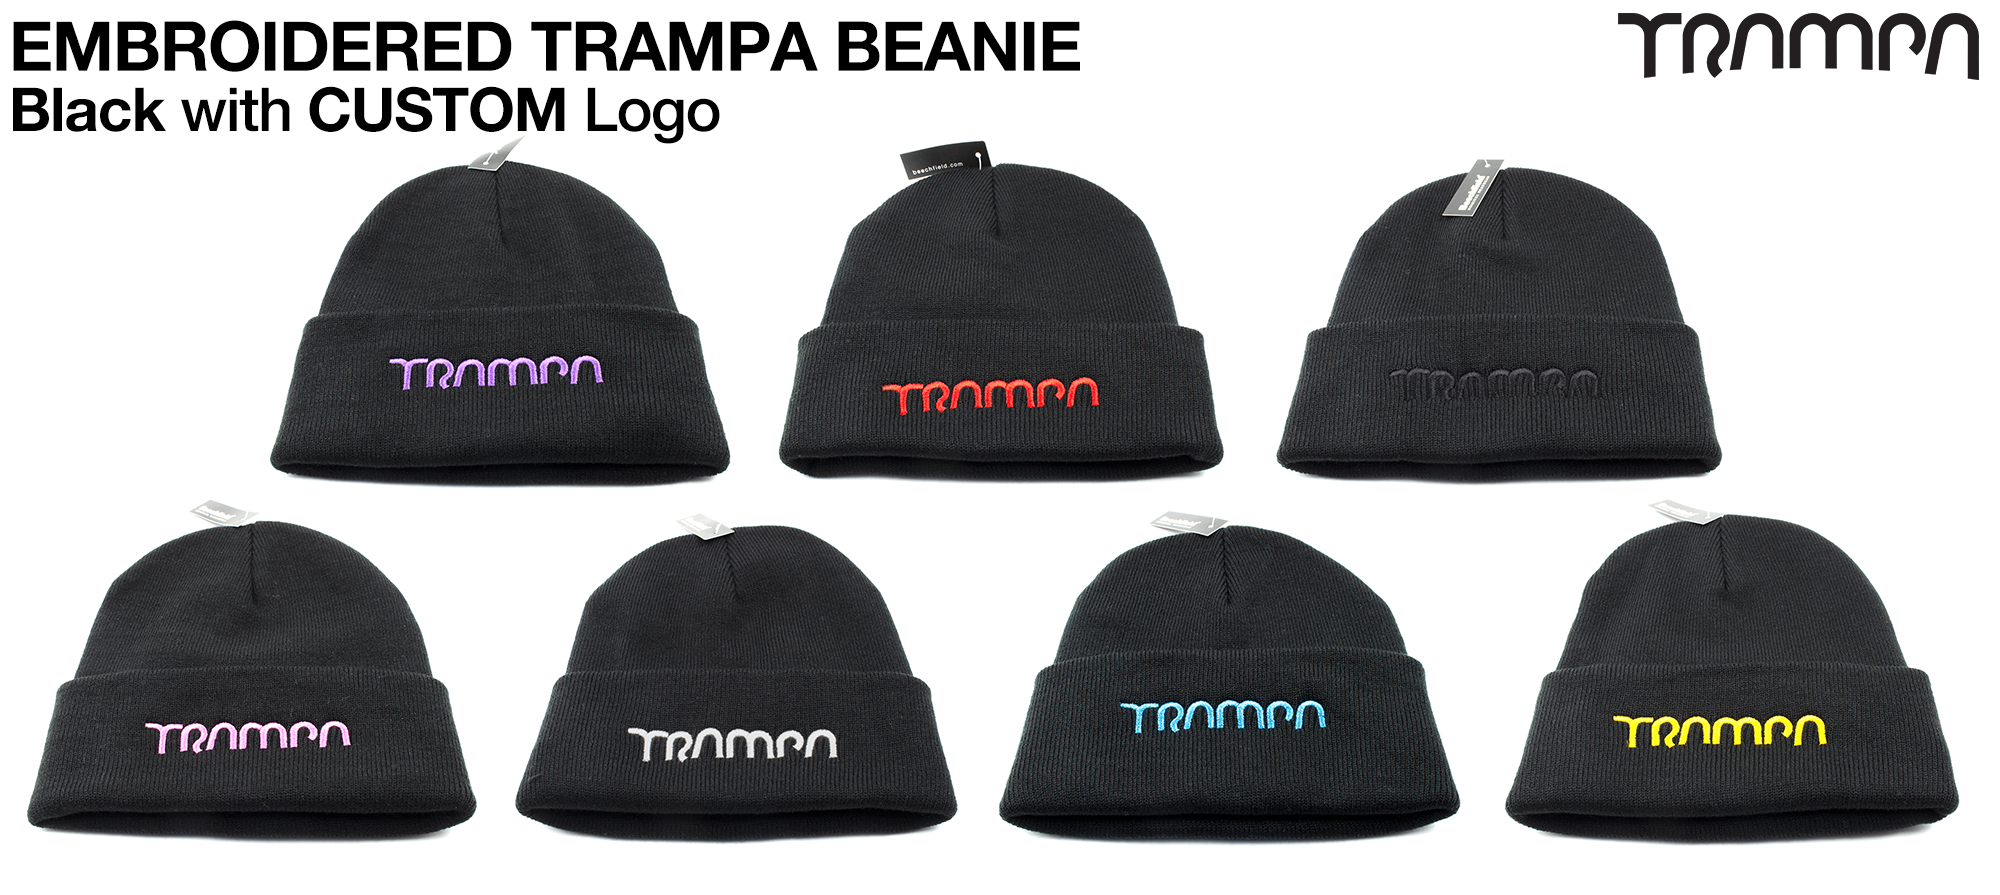 BLACK Beanie with EMBROIDERED TRAMPA logo   - Double thick turn over for extra warmth 